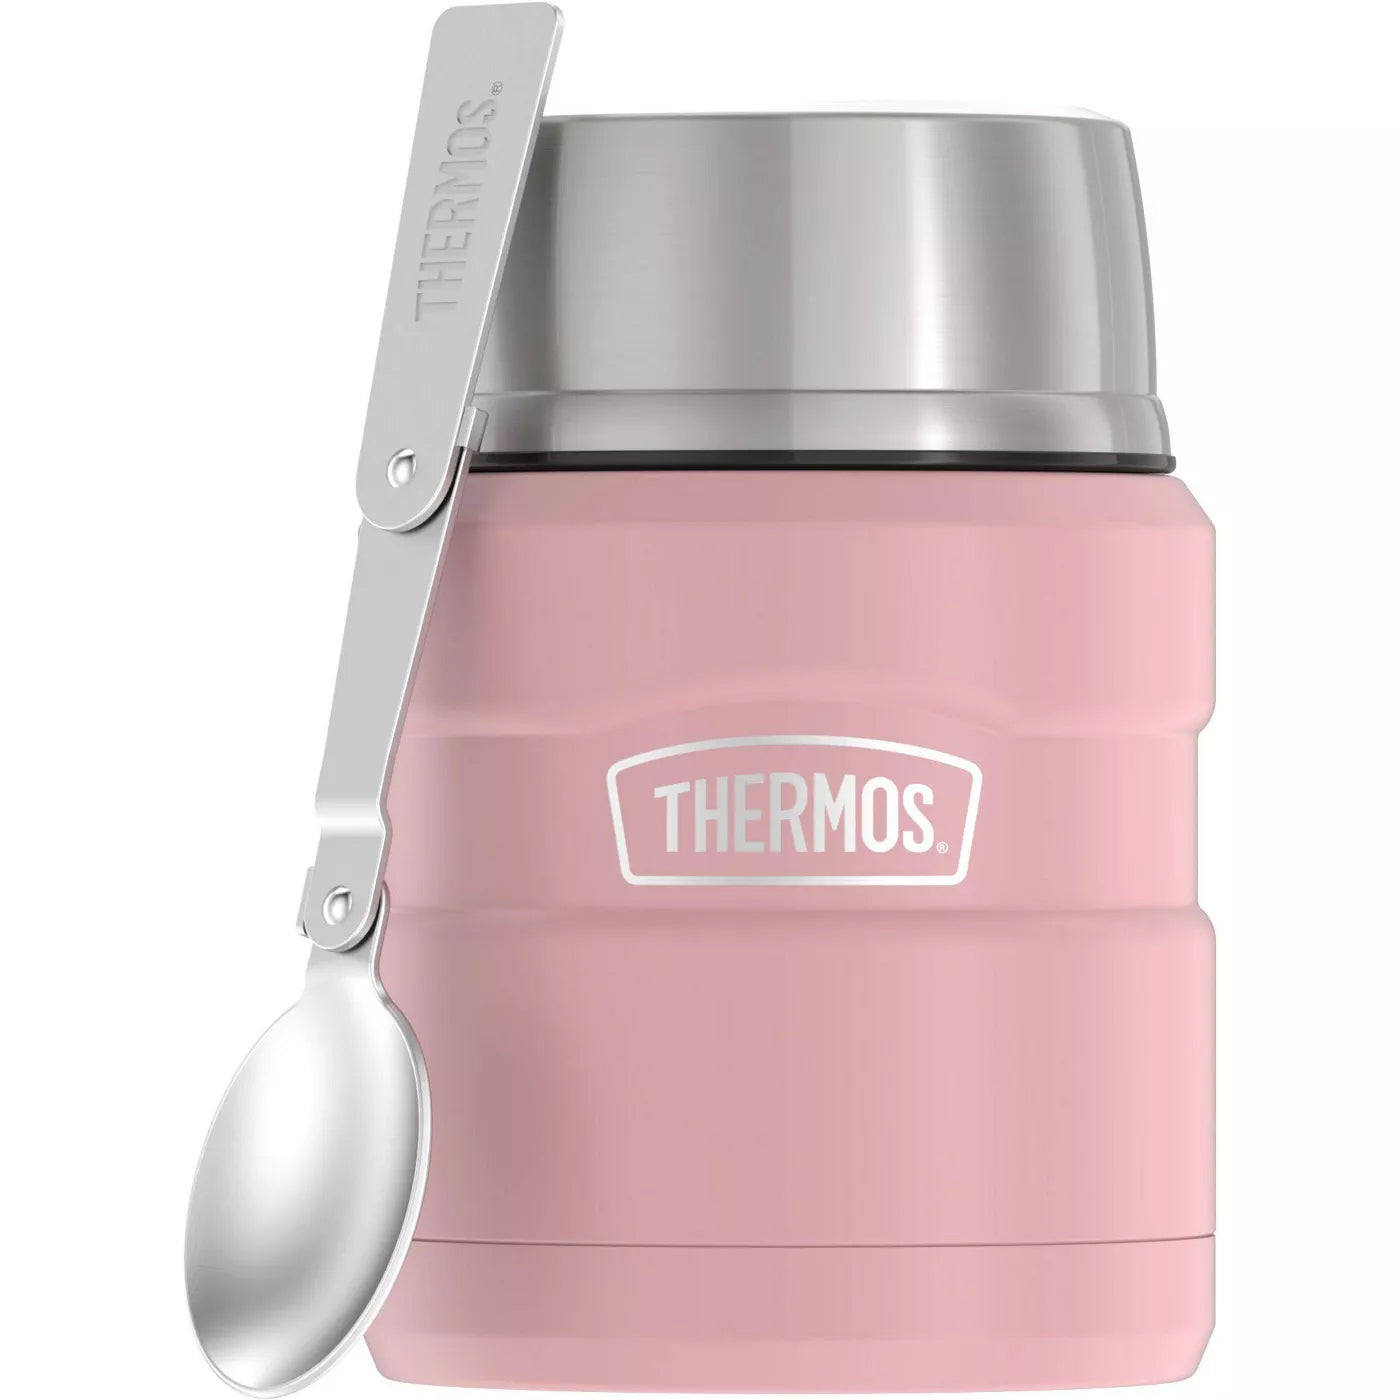 THERMOS Stainless King Vacuum-Insulated Food Jar with Spoon, 16 Oz